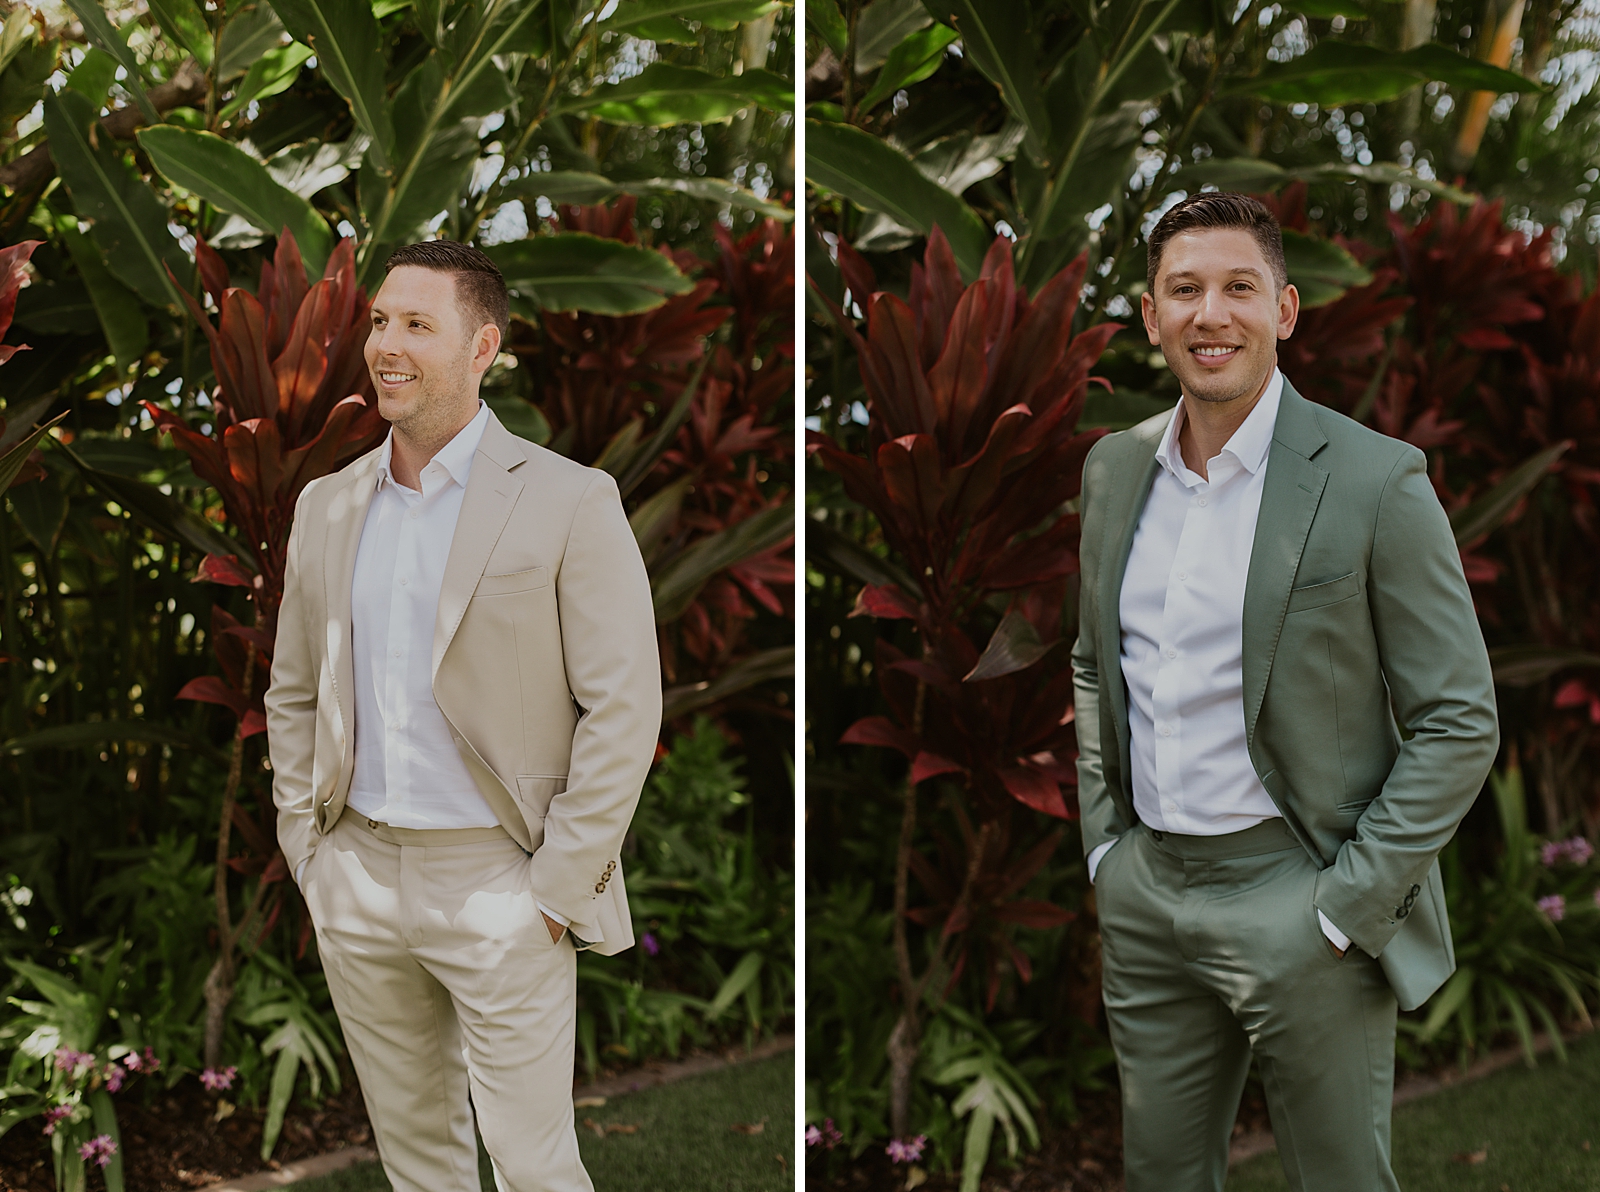 Individual portraits of Grooms in front of greenery